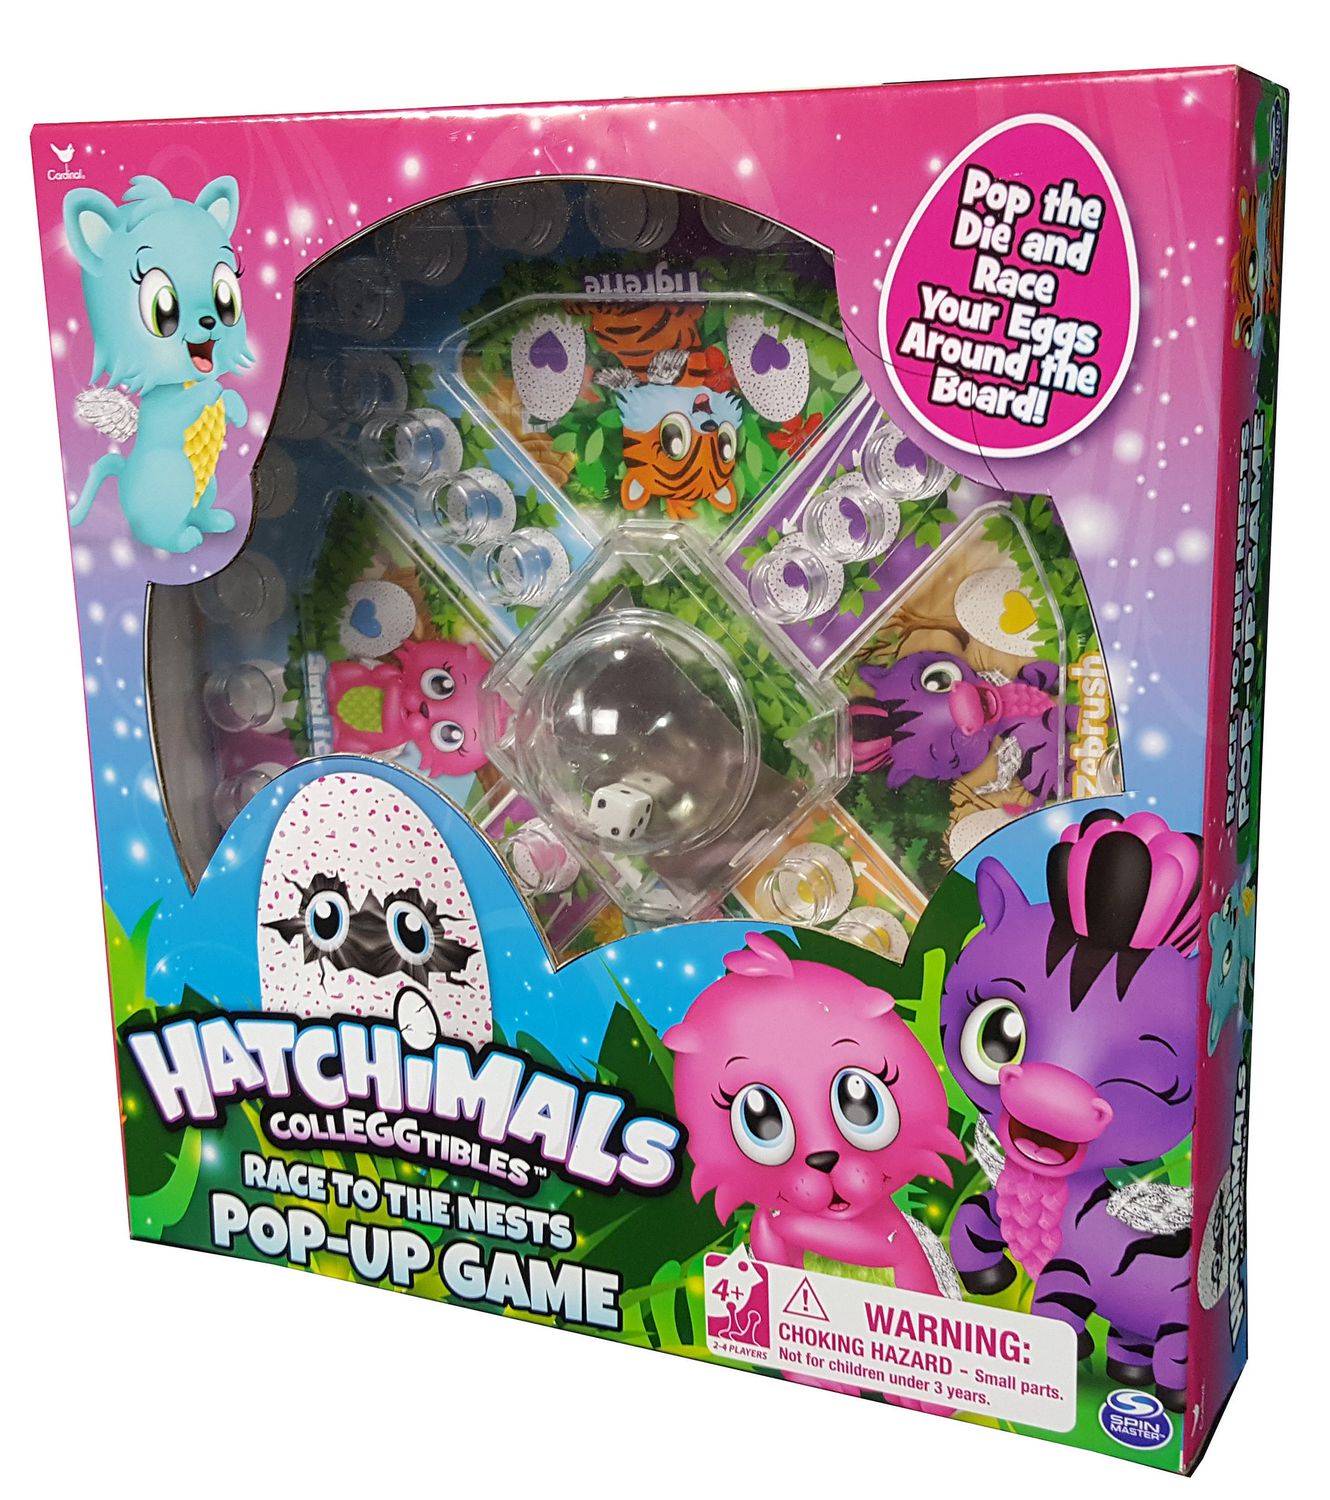 Toys R Us HATCHIMALS POPUP GAME (90085)